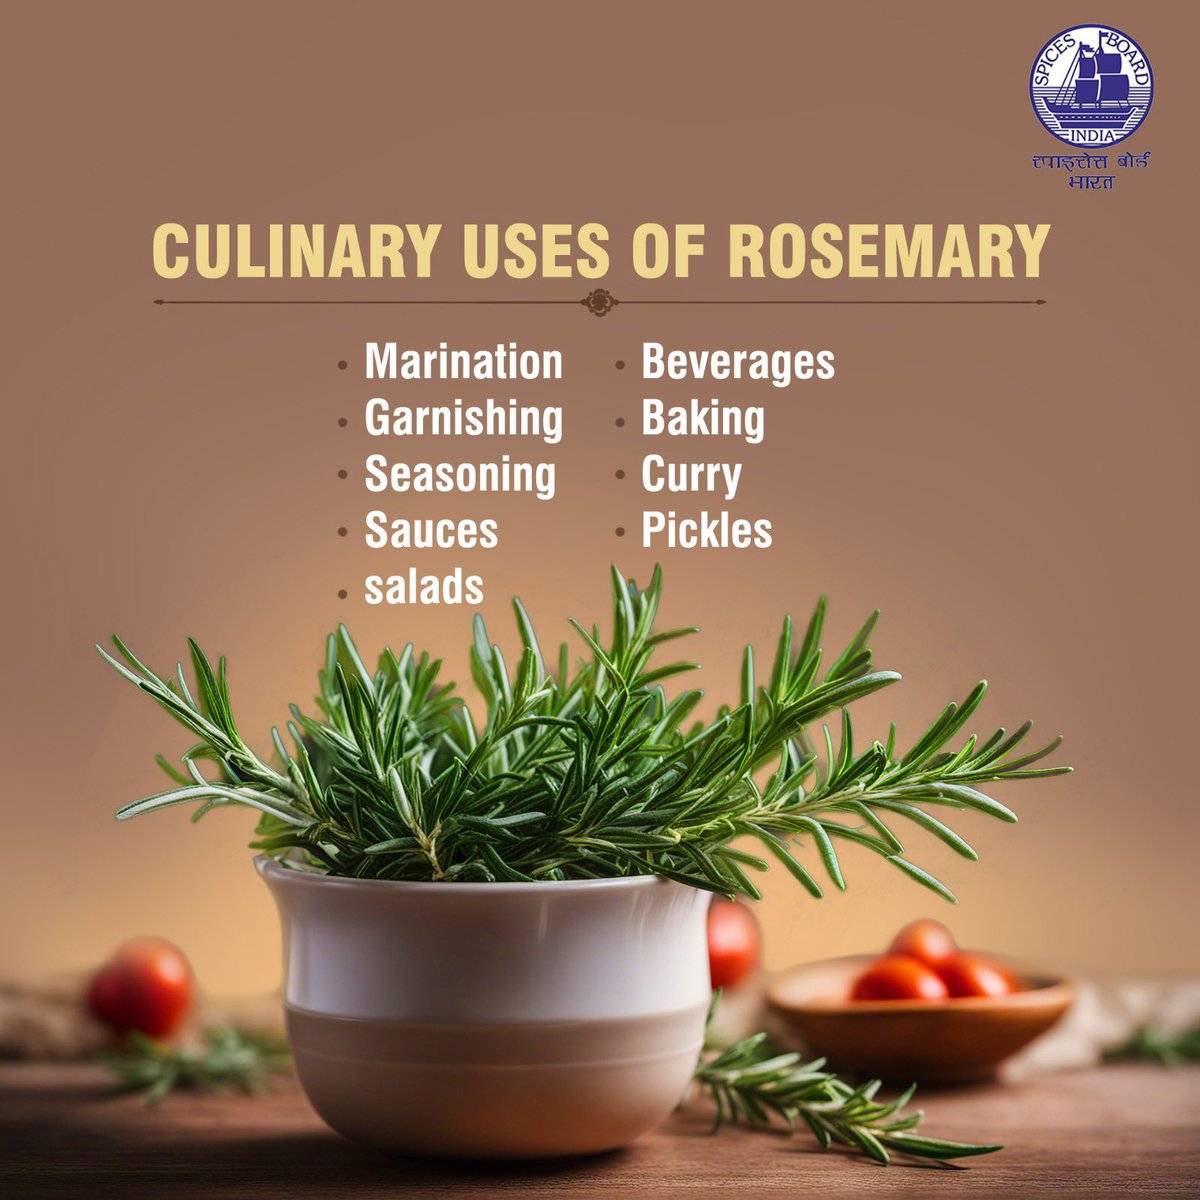 Elevate your culinary creations with the rosemary! @doc_goi #spicesboard #rosemary #incrediblespicesofindia